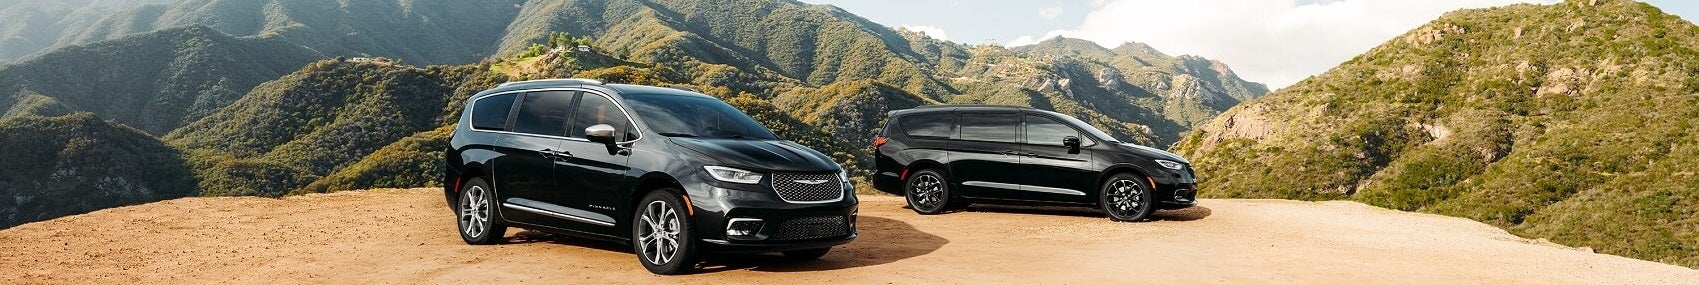 CHRYSLER PACIFICA CONFIGURATIONS